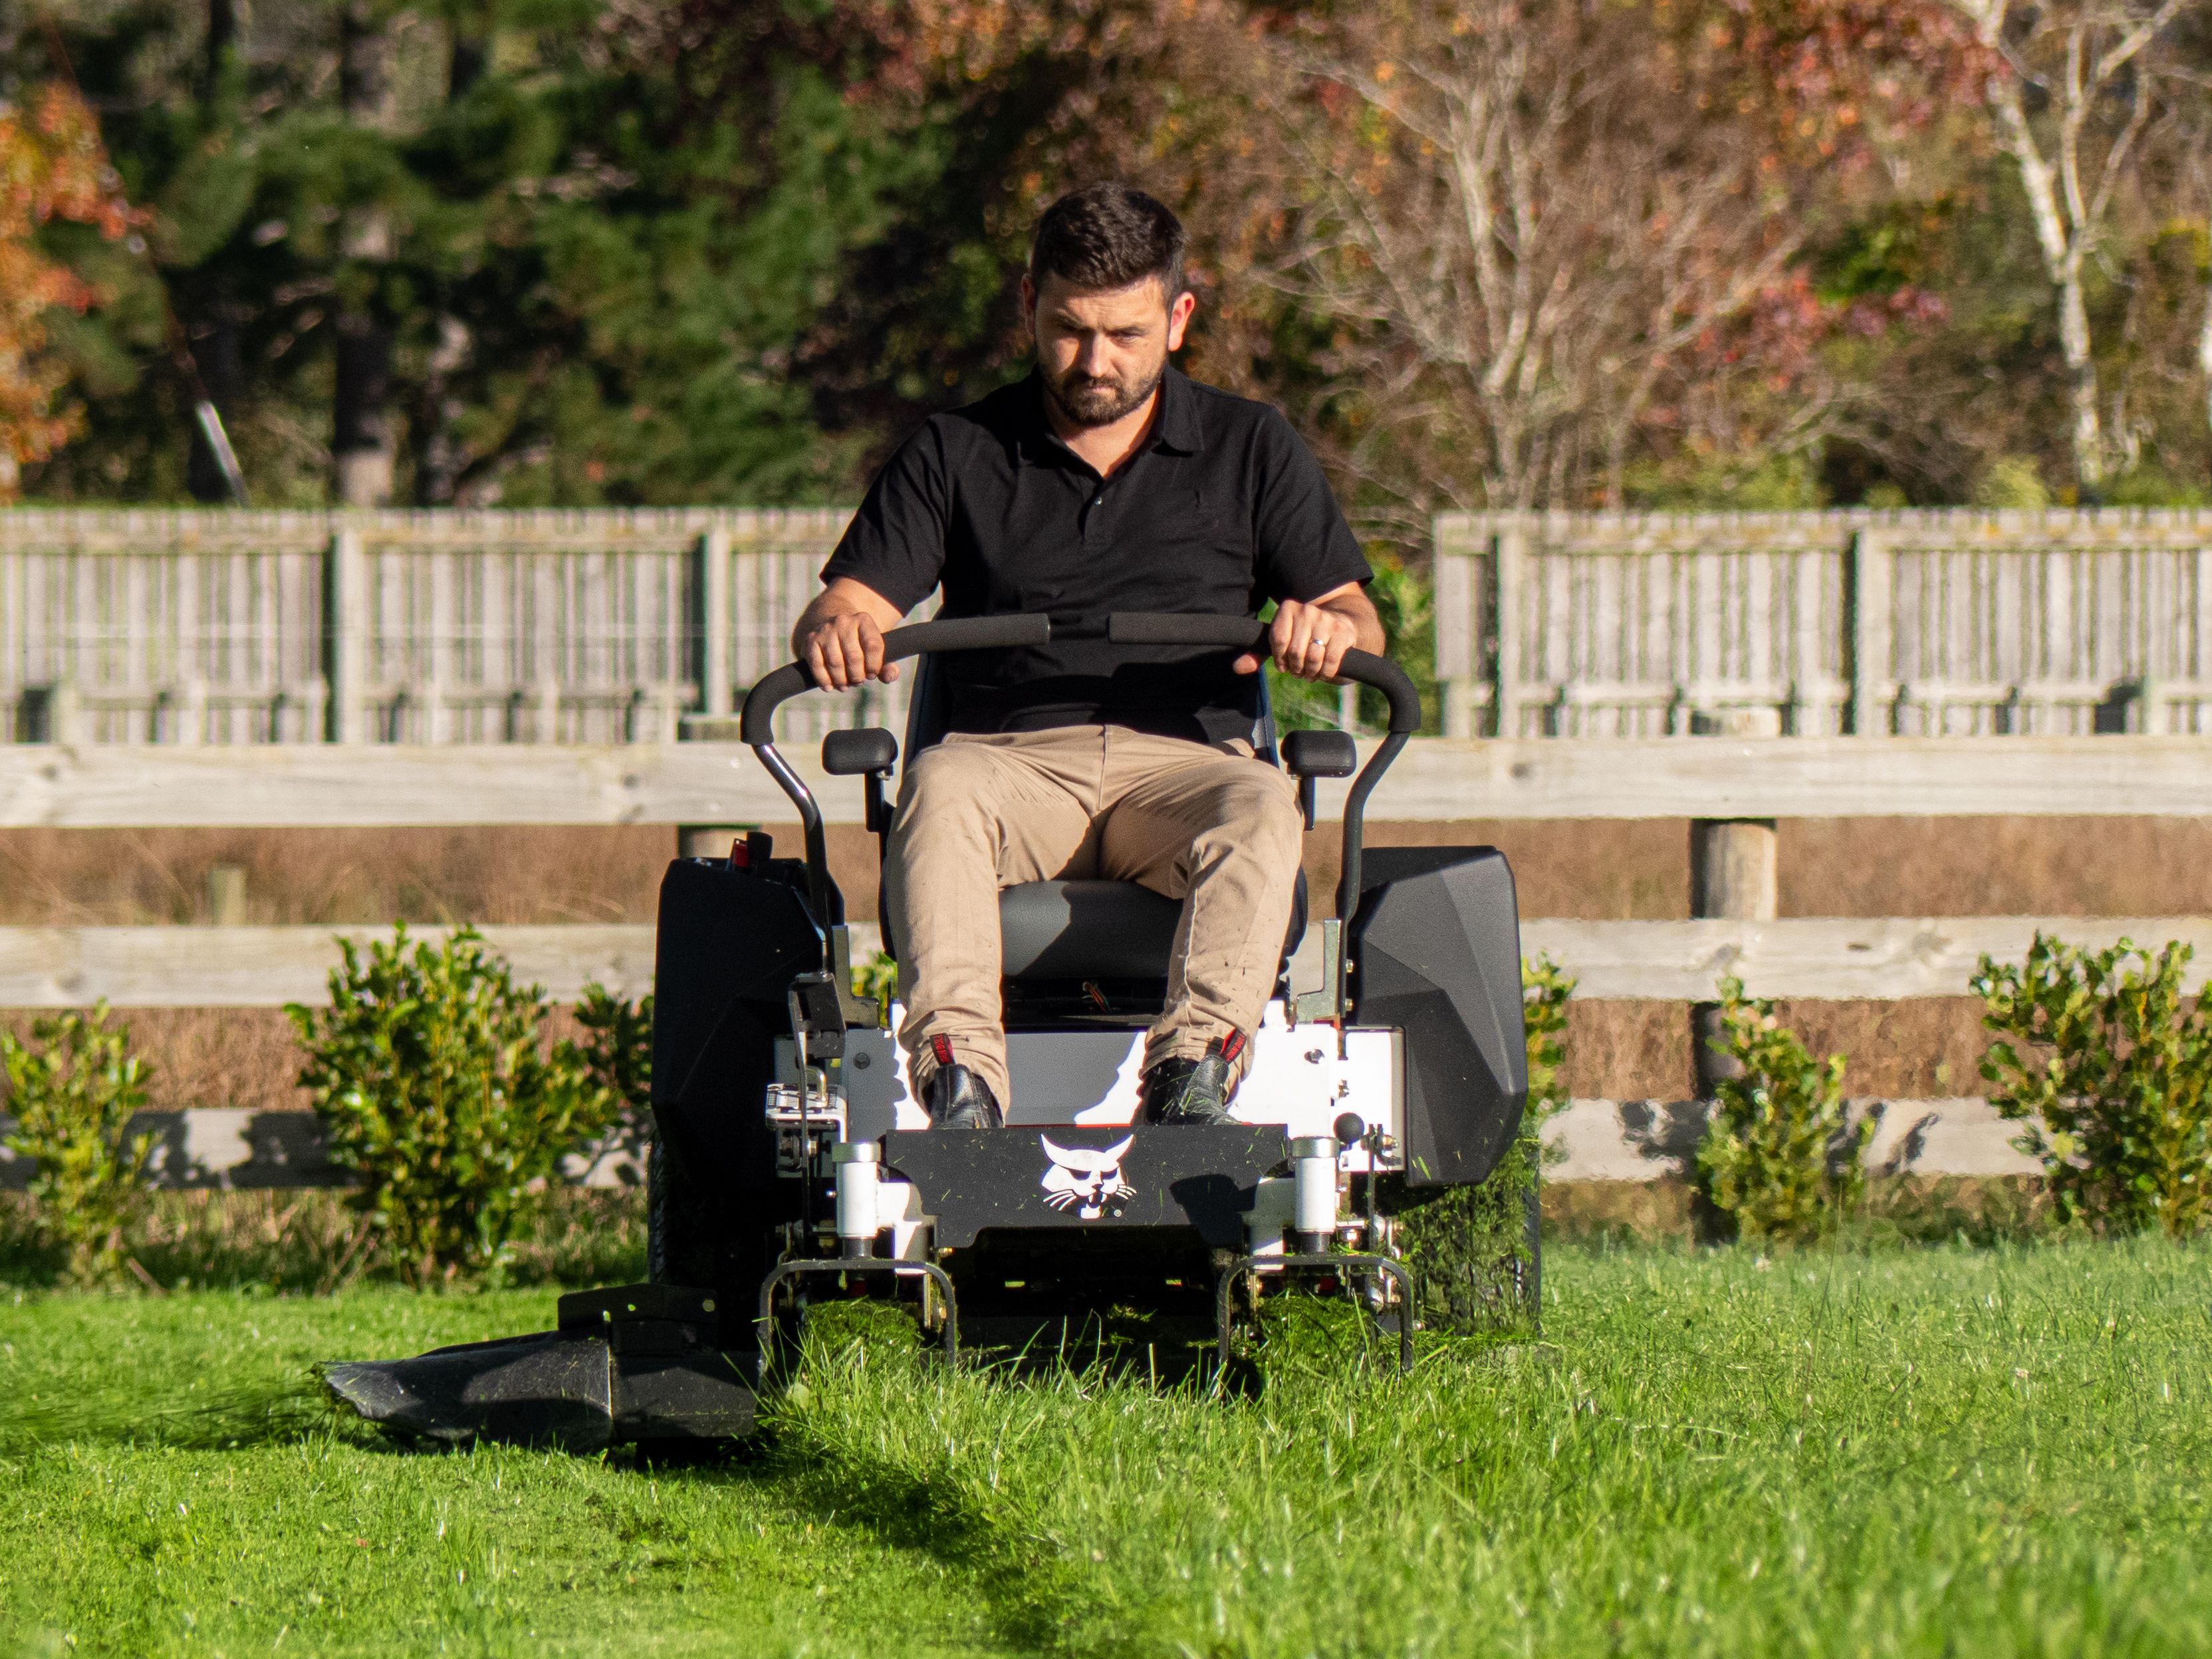 Riding Lawn Mower Vs Push Lawn Mower: Which Is Right For Your Home?